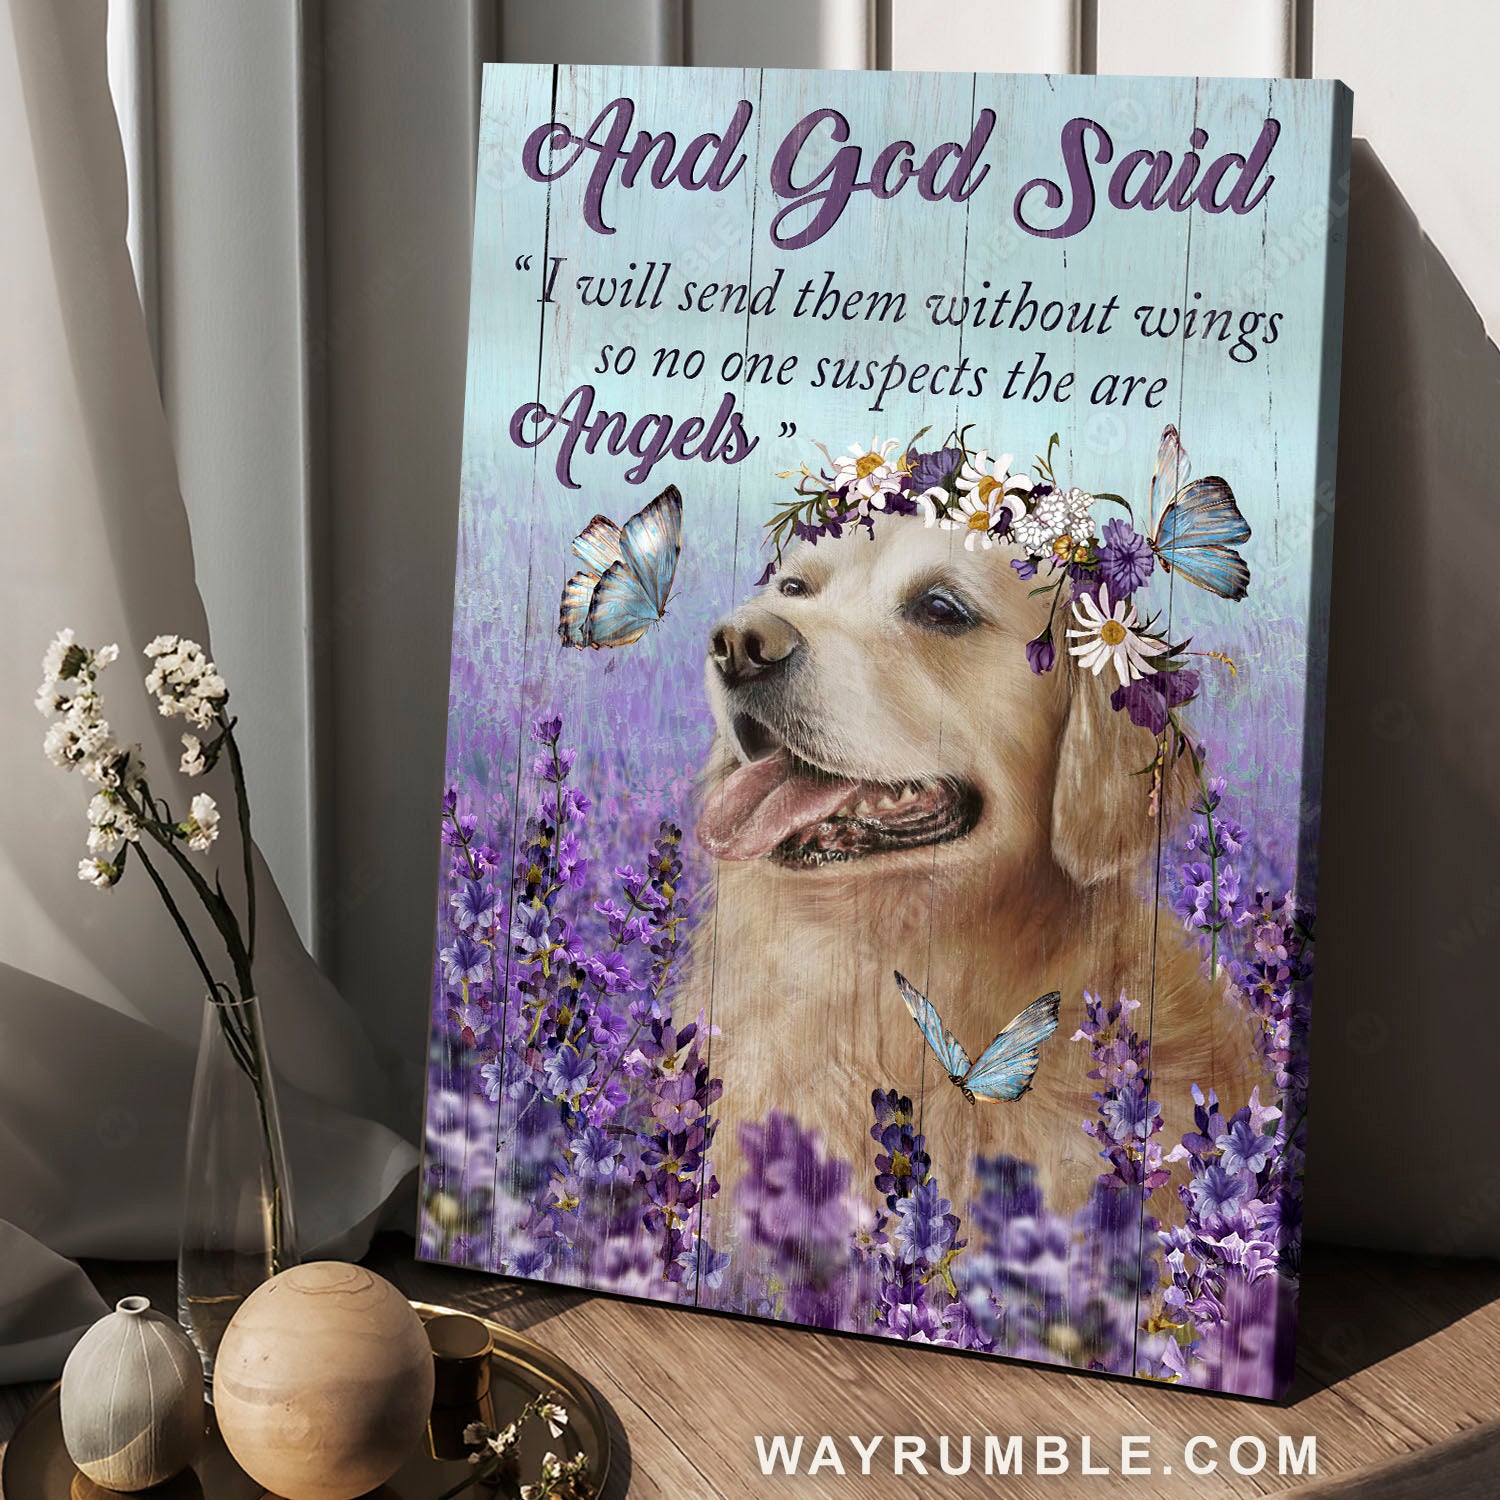 Golden Retriever, Lavender field, Blue butterfly, Lovely angel, And God said - Jesus Portrait Canvas Prints, Home Decor Wall Art